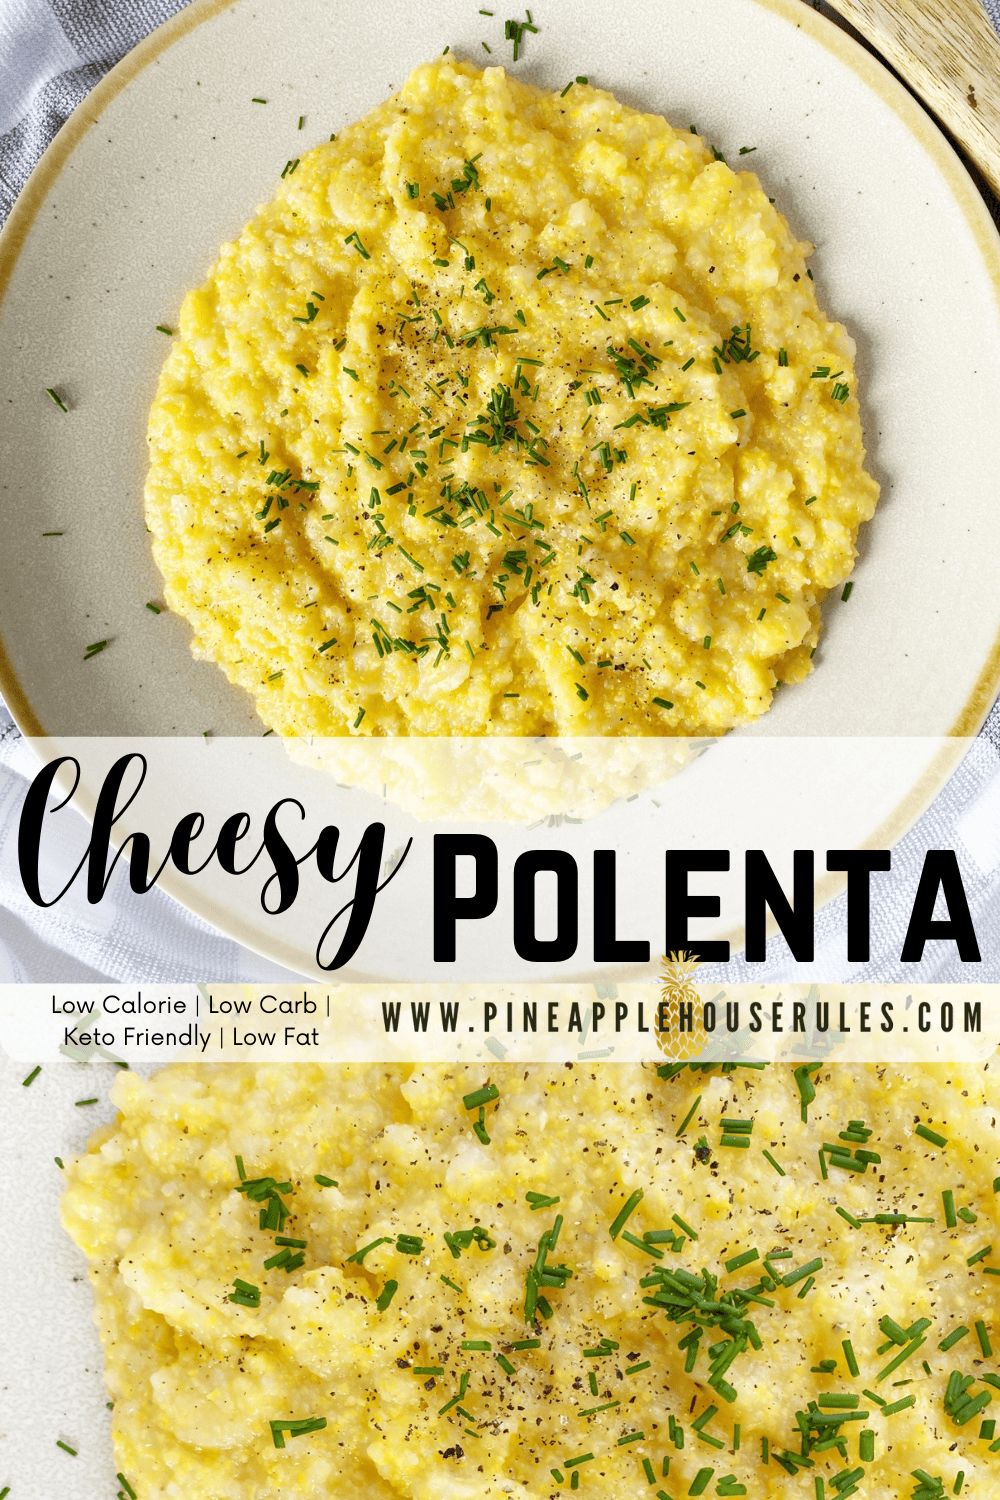 This Cheesy Polenta recipe is one of the easiest and tastiest side dishes you can make using things that can be kept on-hand in the pantry and fridge. A little cheese adds an amazing amount of flavor, too! Cheesy Polenta | Cheesy Polenta Recipes | Cheesy Polenta Recipes Easy | Cheesy Polenta Recipes Cheddar | Cheesy Polenta Recipes Tube | Polenta Recipes | Polenta Recipes Tube | Polenta Recipes Easy | Polenta Tube Recipes | Polenta Tube Recipes Easy | Side Dish Recipes | Side Dish Recipes Easy